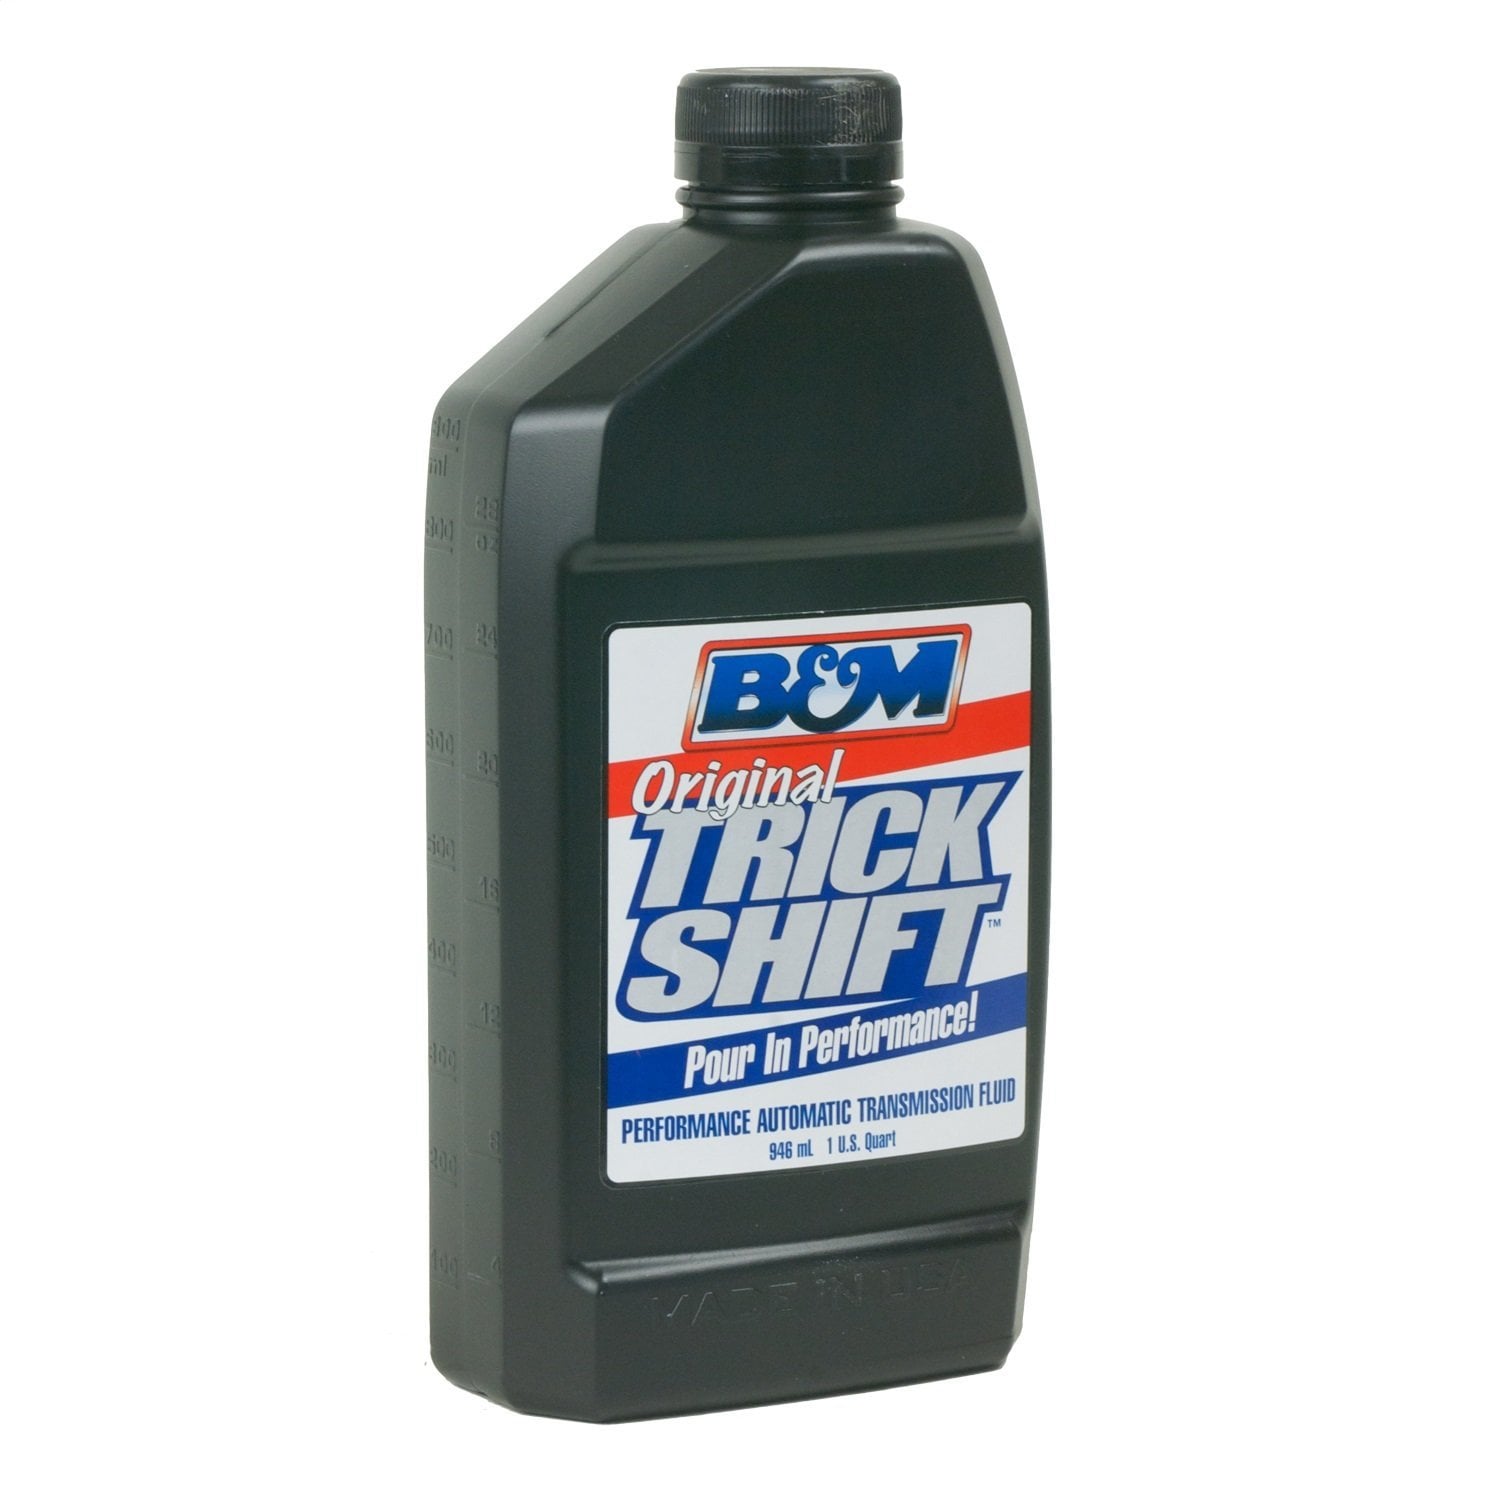 Automatic transmission Fluid. Esso Automatic transmission Fluid. Automatic transmission герметик. Transmission Shift ATF banner.